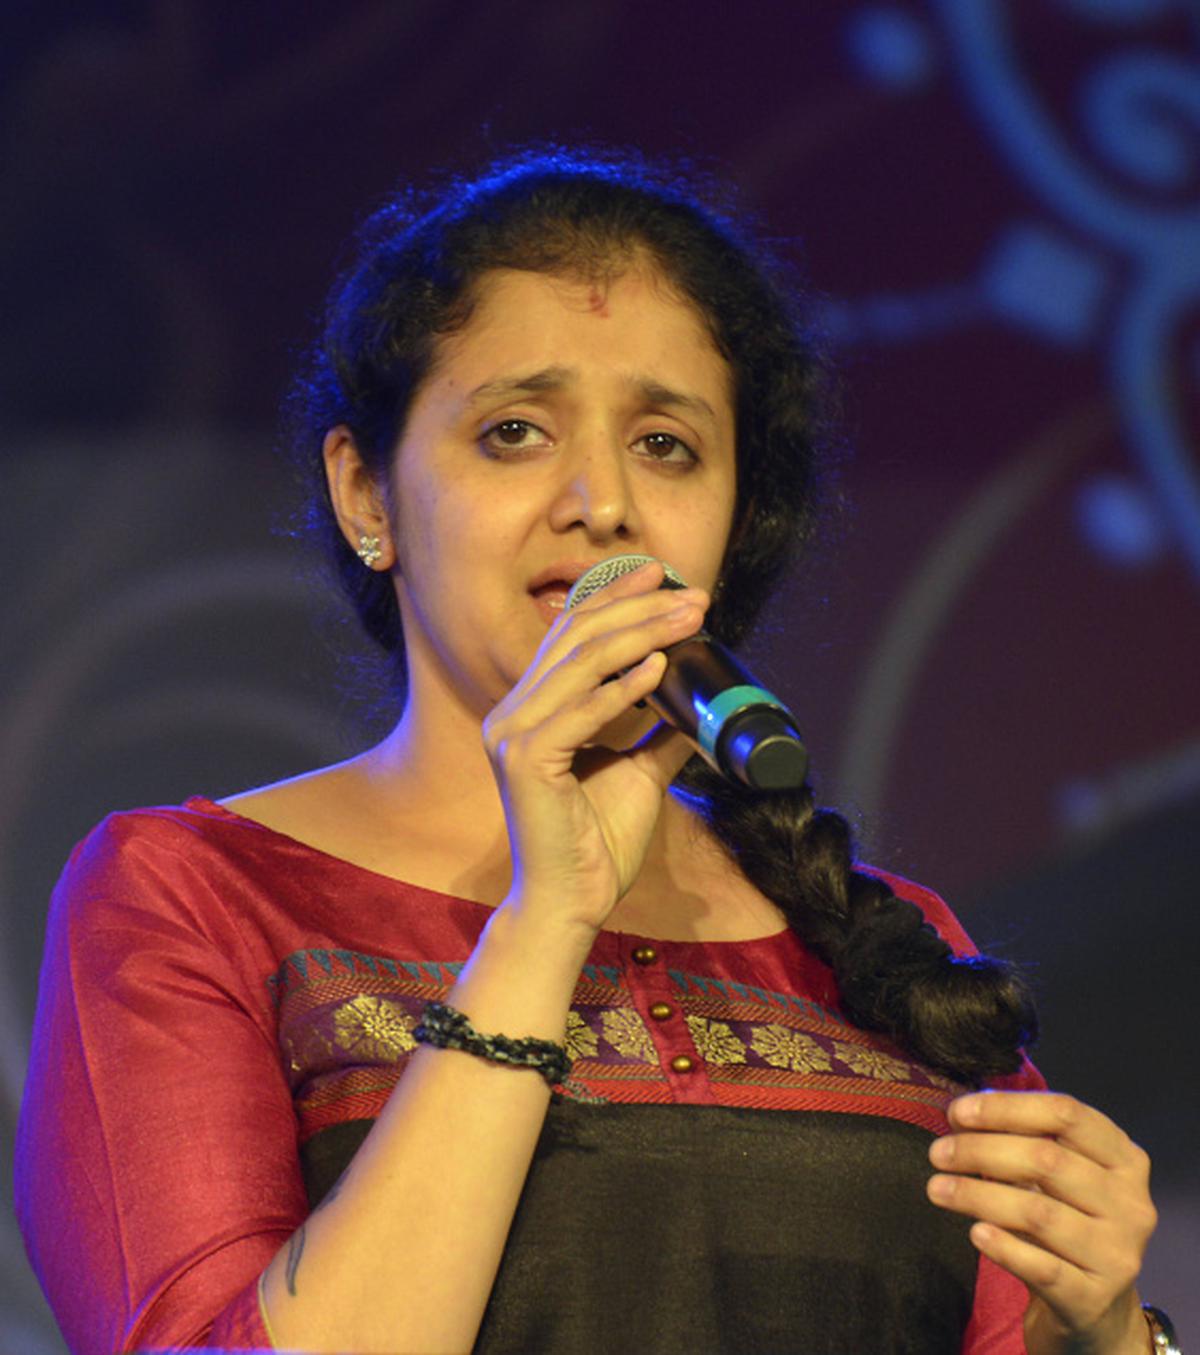 Workshop on singing will focus on three songs from different genres